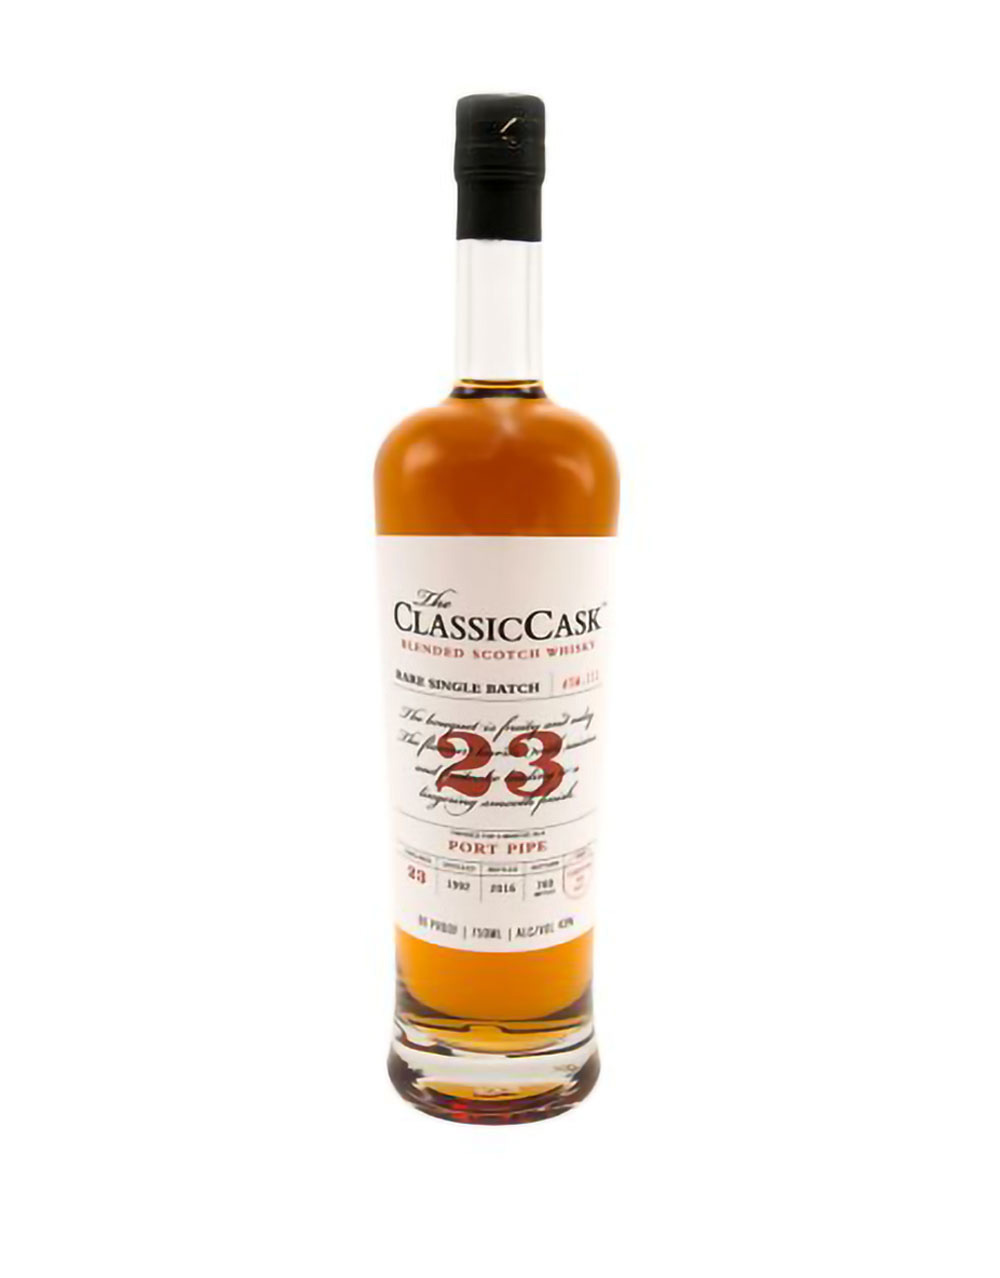 The Classic Cask 23 Year Old Port Finish Blended Scotch Whisky